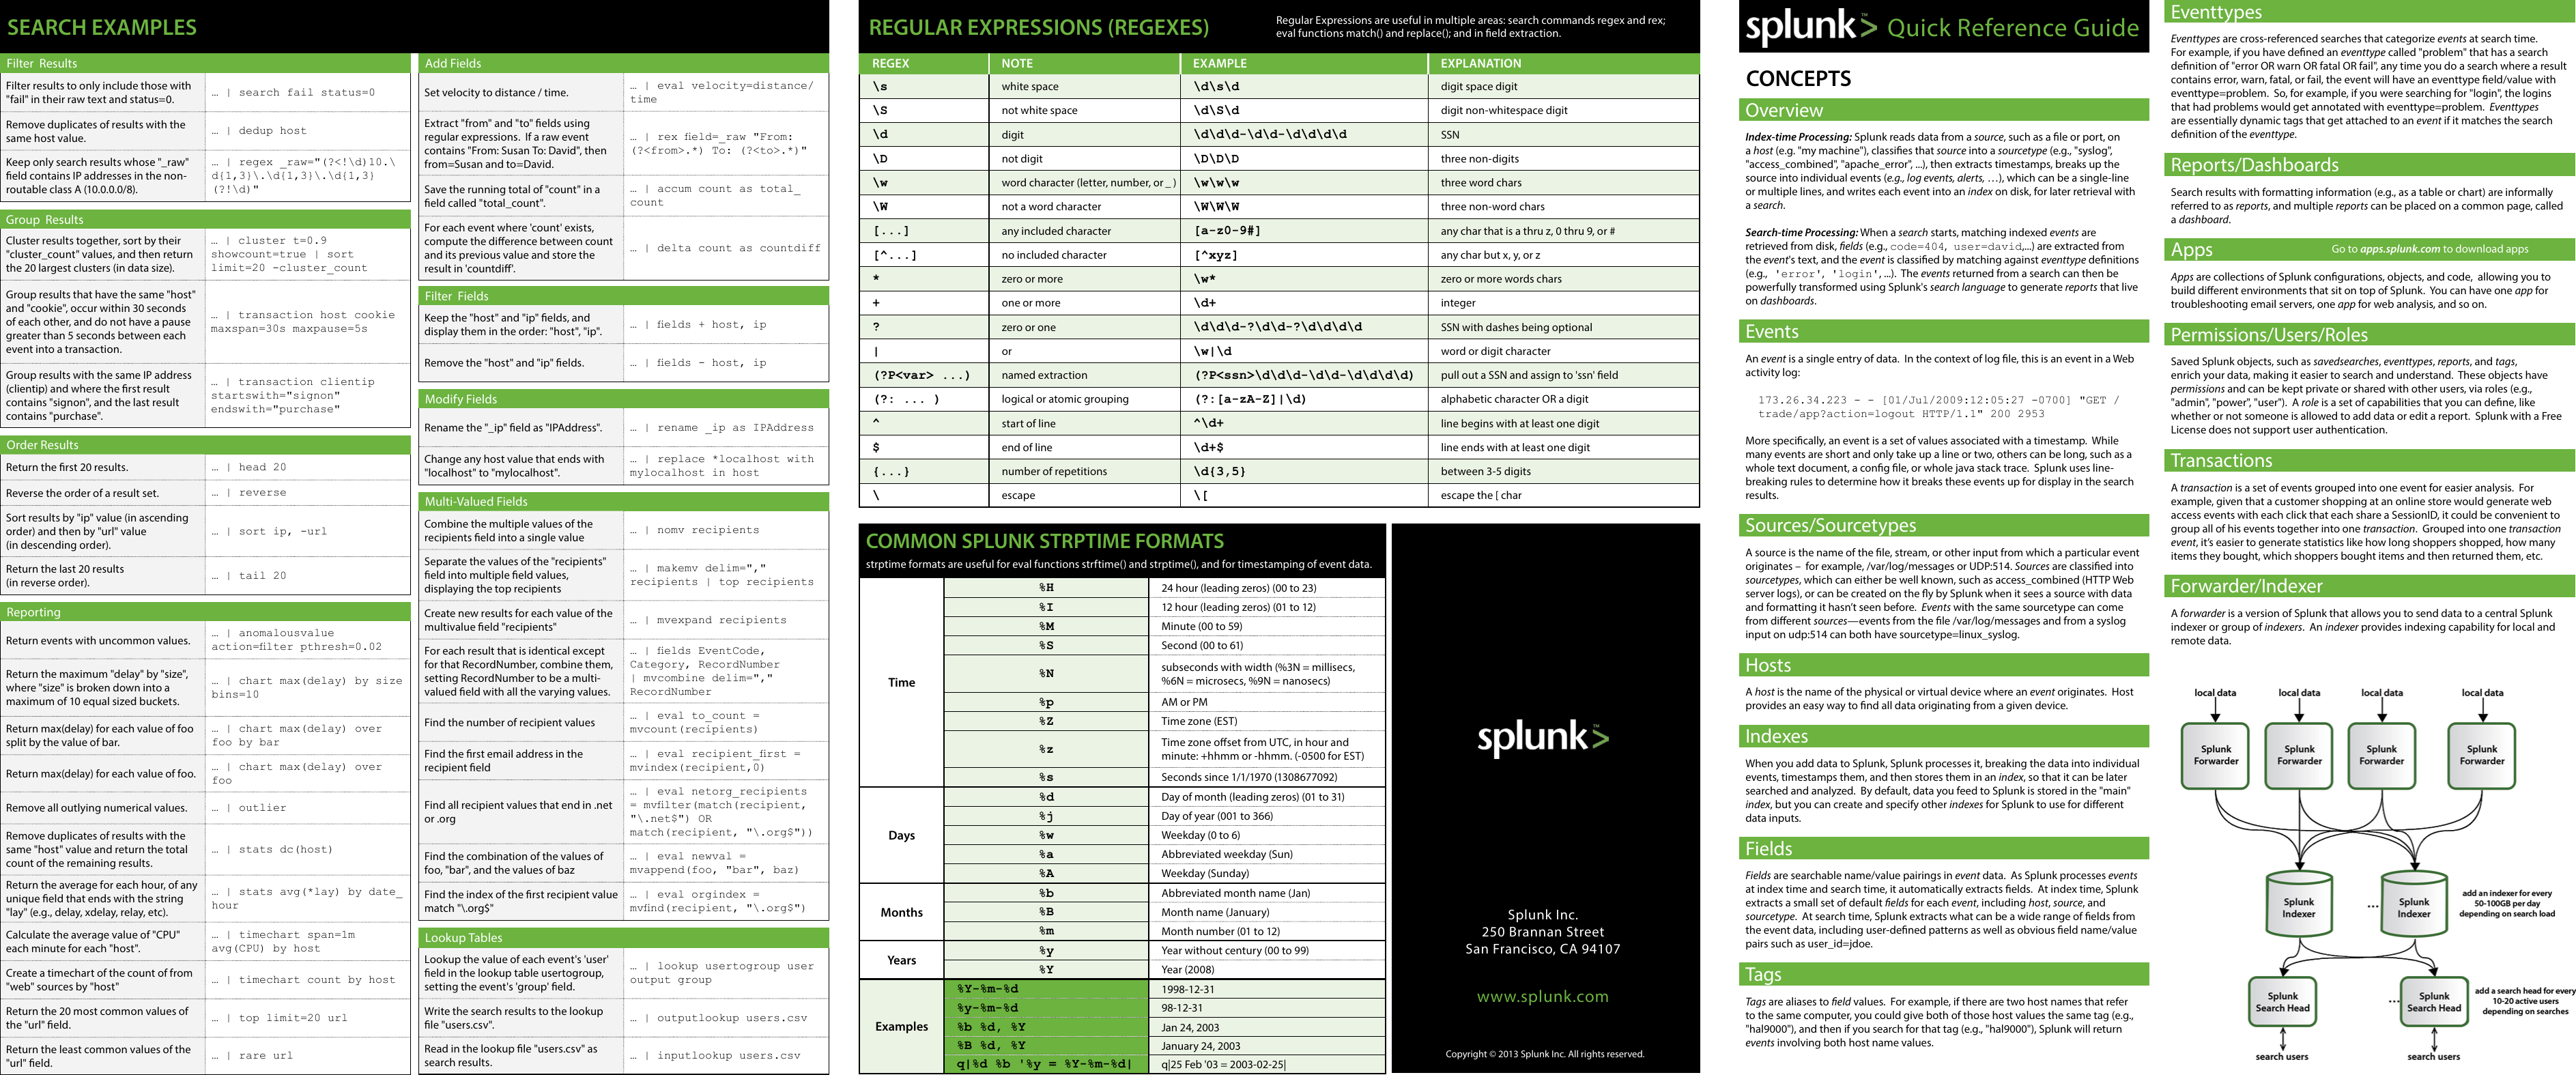 Page 1 of 2 - Splunk Quick Reference Guide 6.x